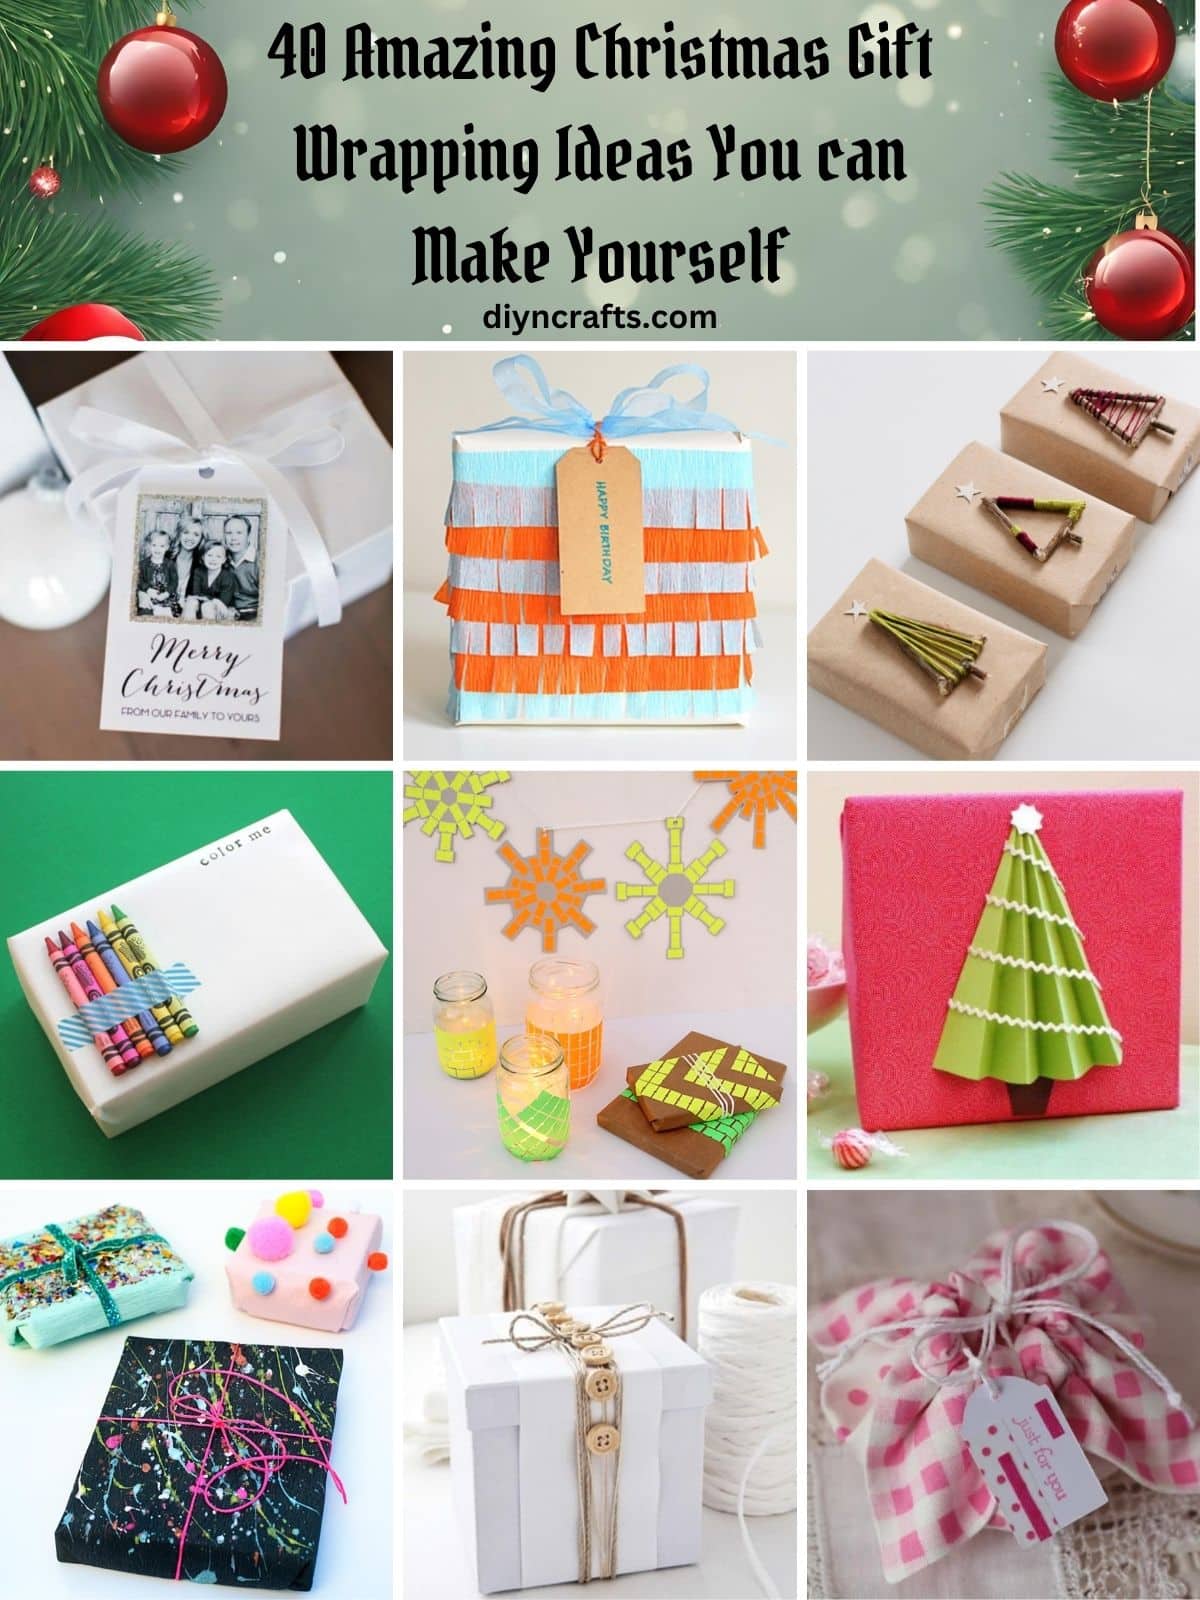 40 Amazing Christmas Gift Wrapping Ideas You can Make Yourself collage.